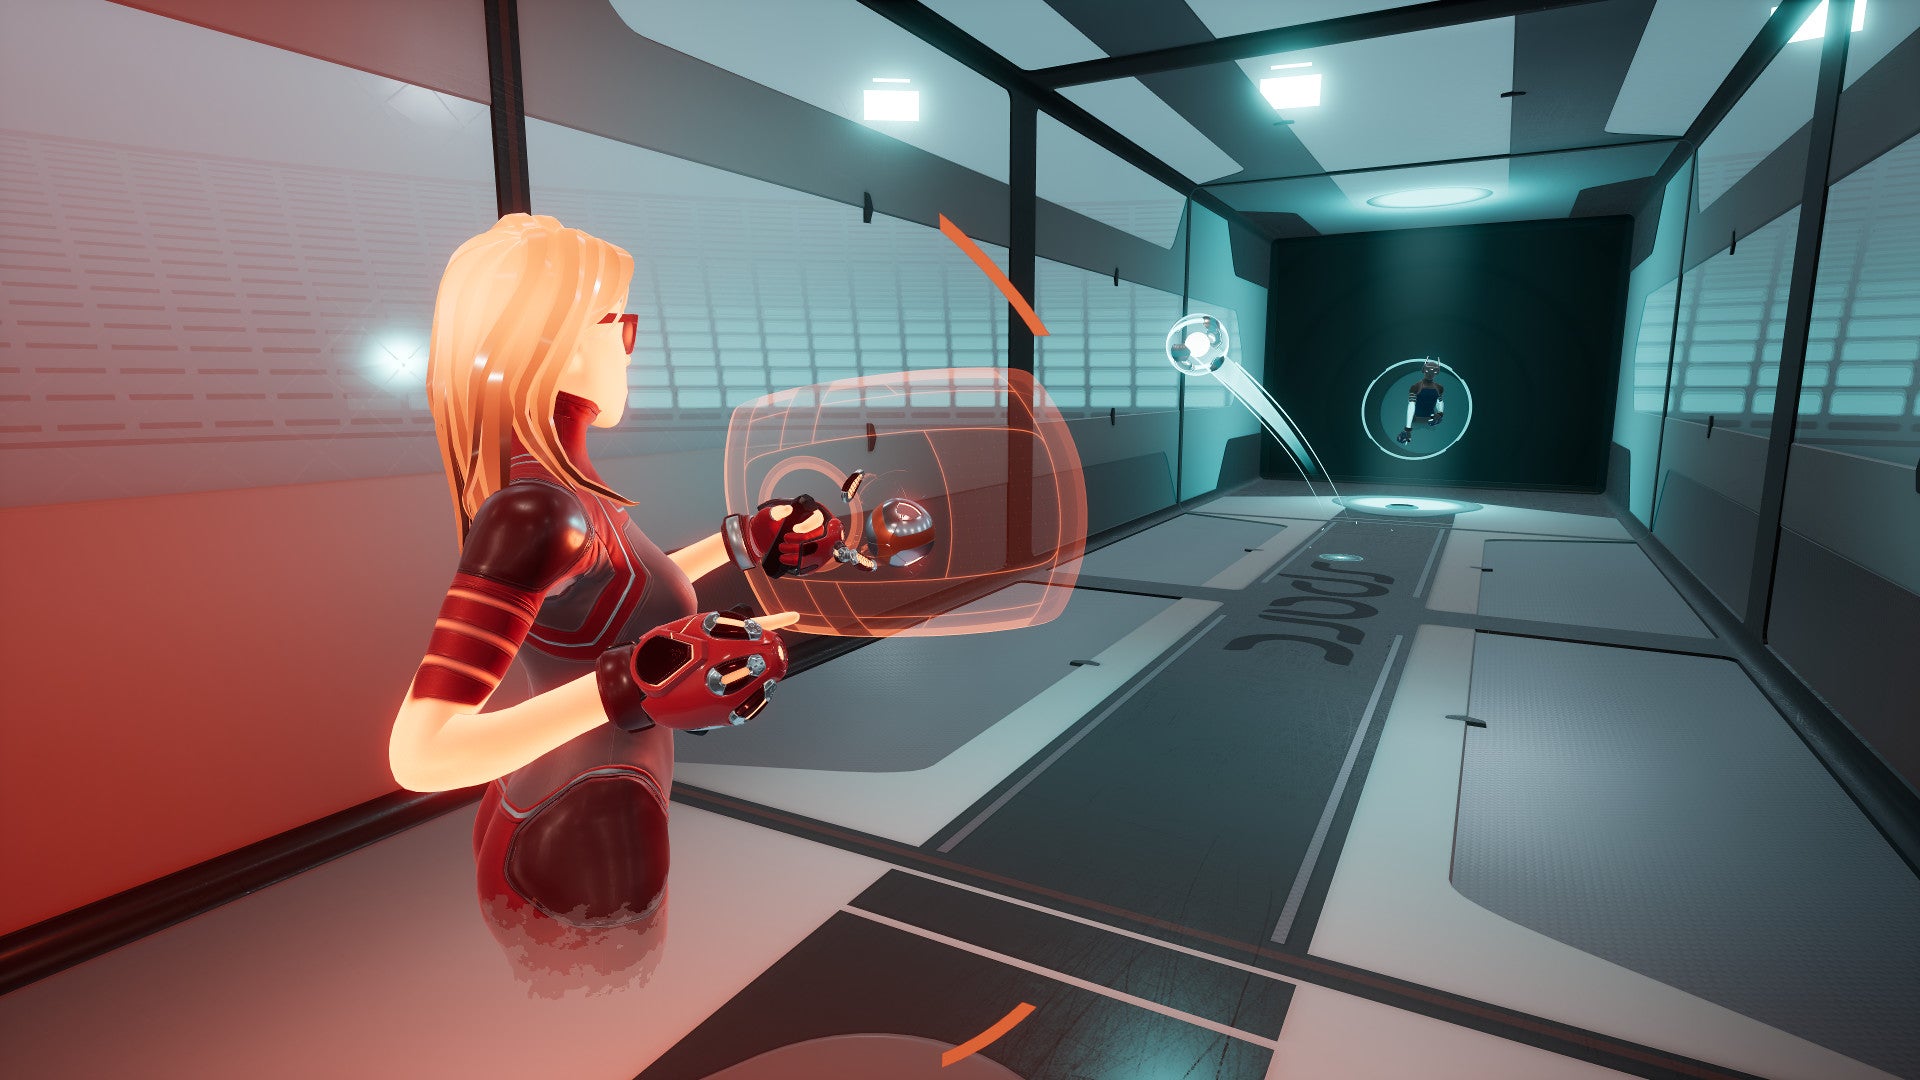 A woman in an orange VR suit prepares to deflect a ball in Sparc